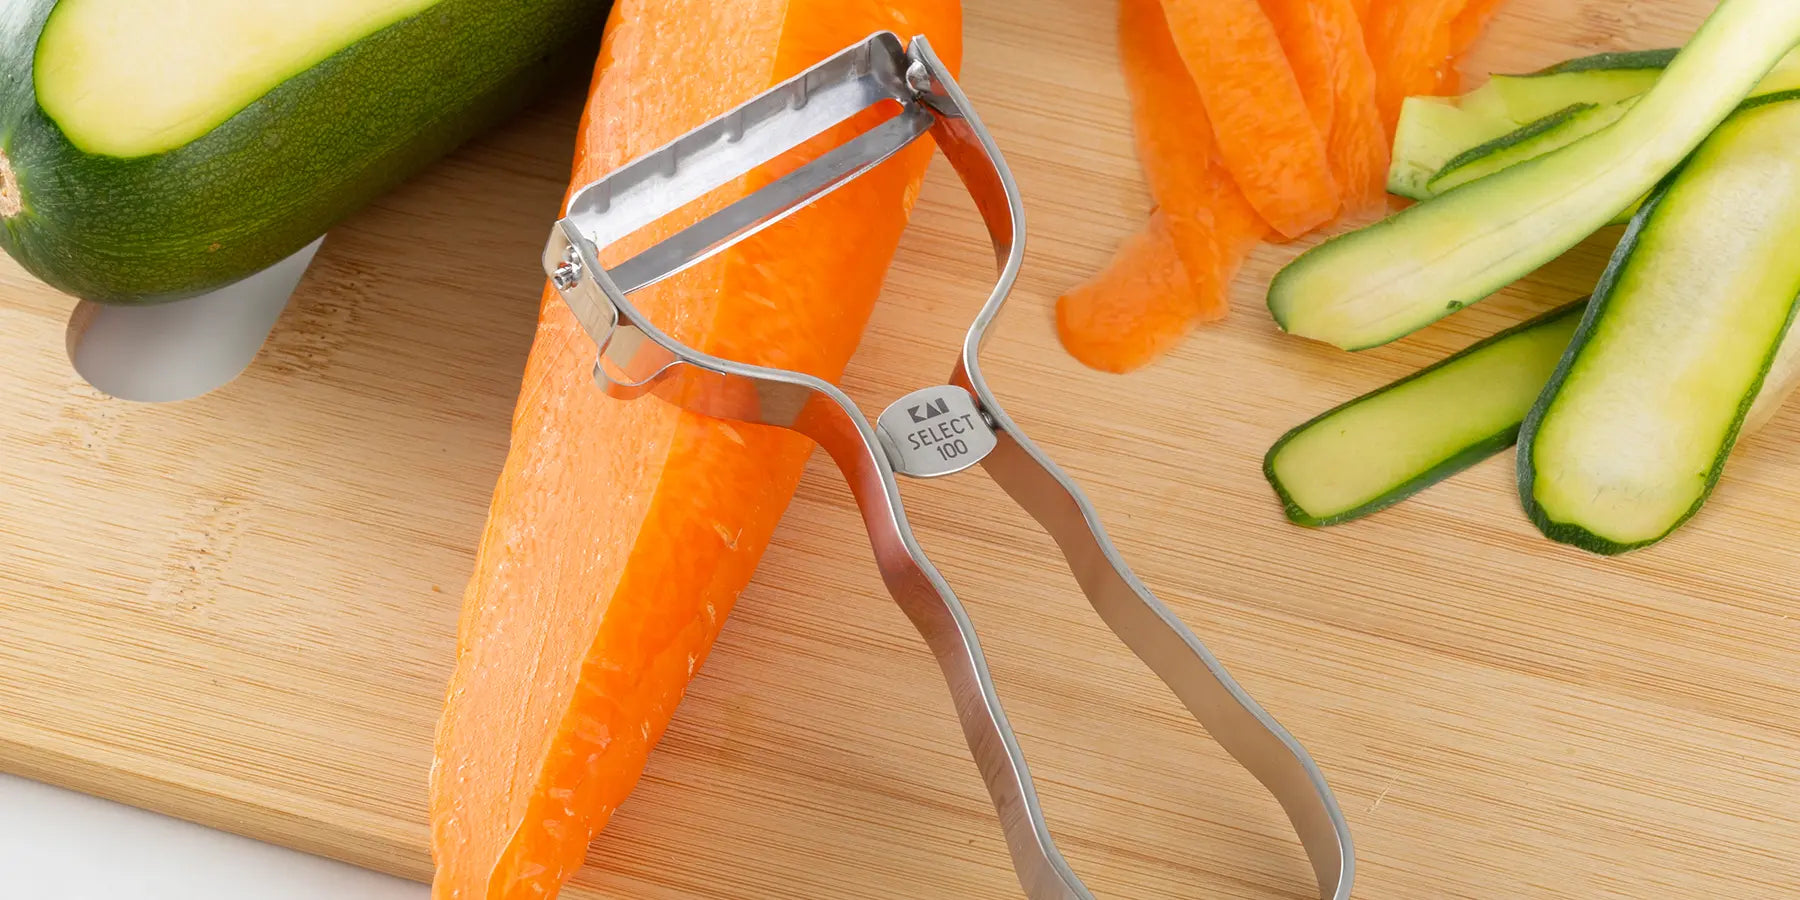 Discover our great selection of Food Peelers & Corers at Globalkitchen Japan.